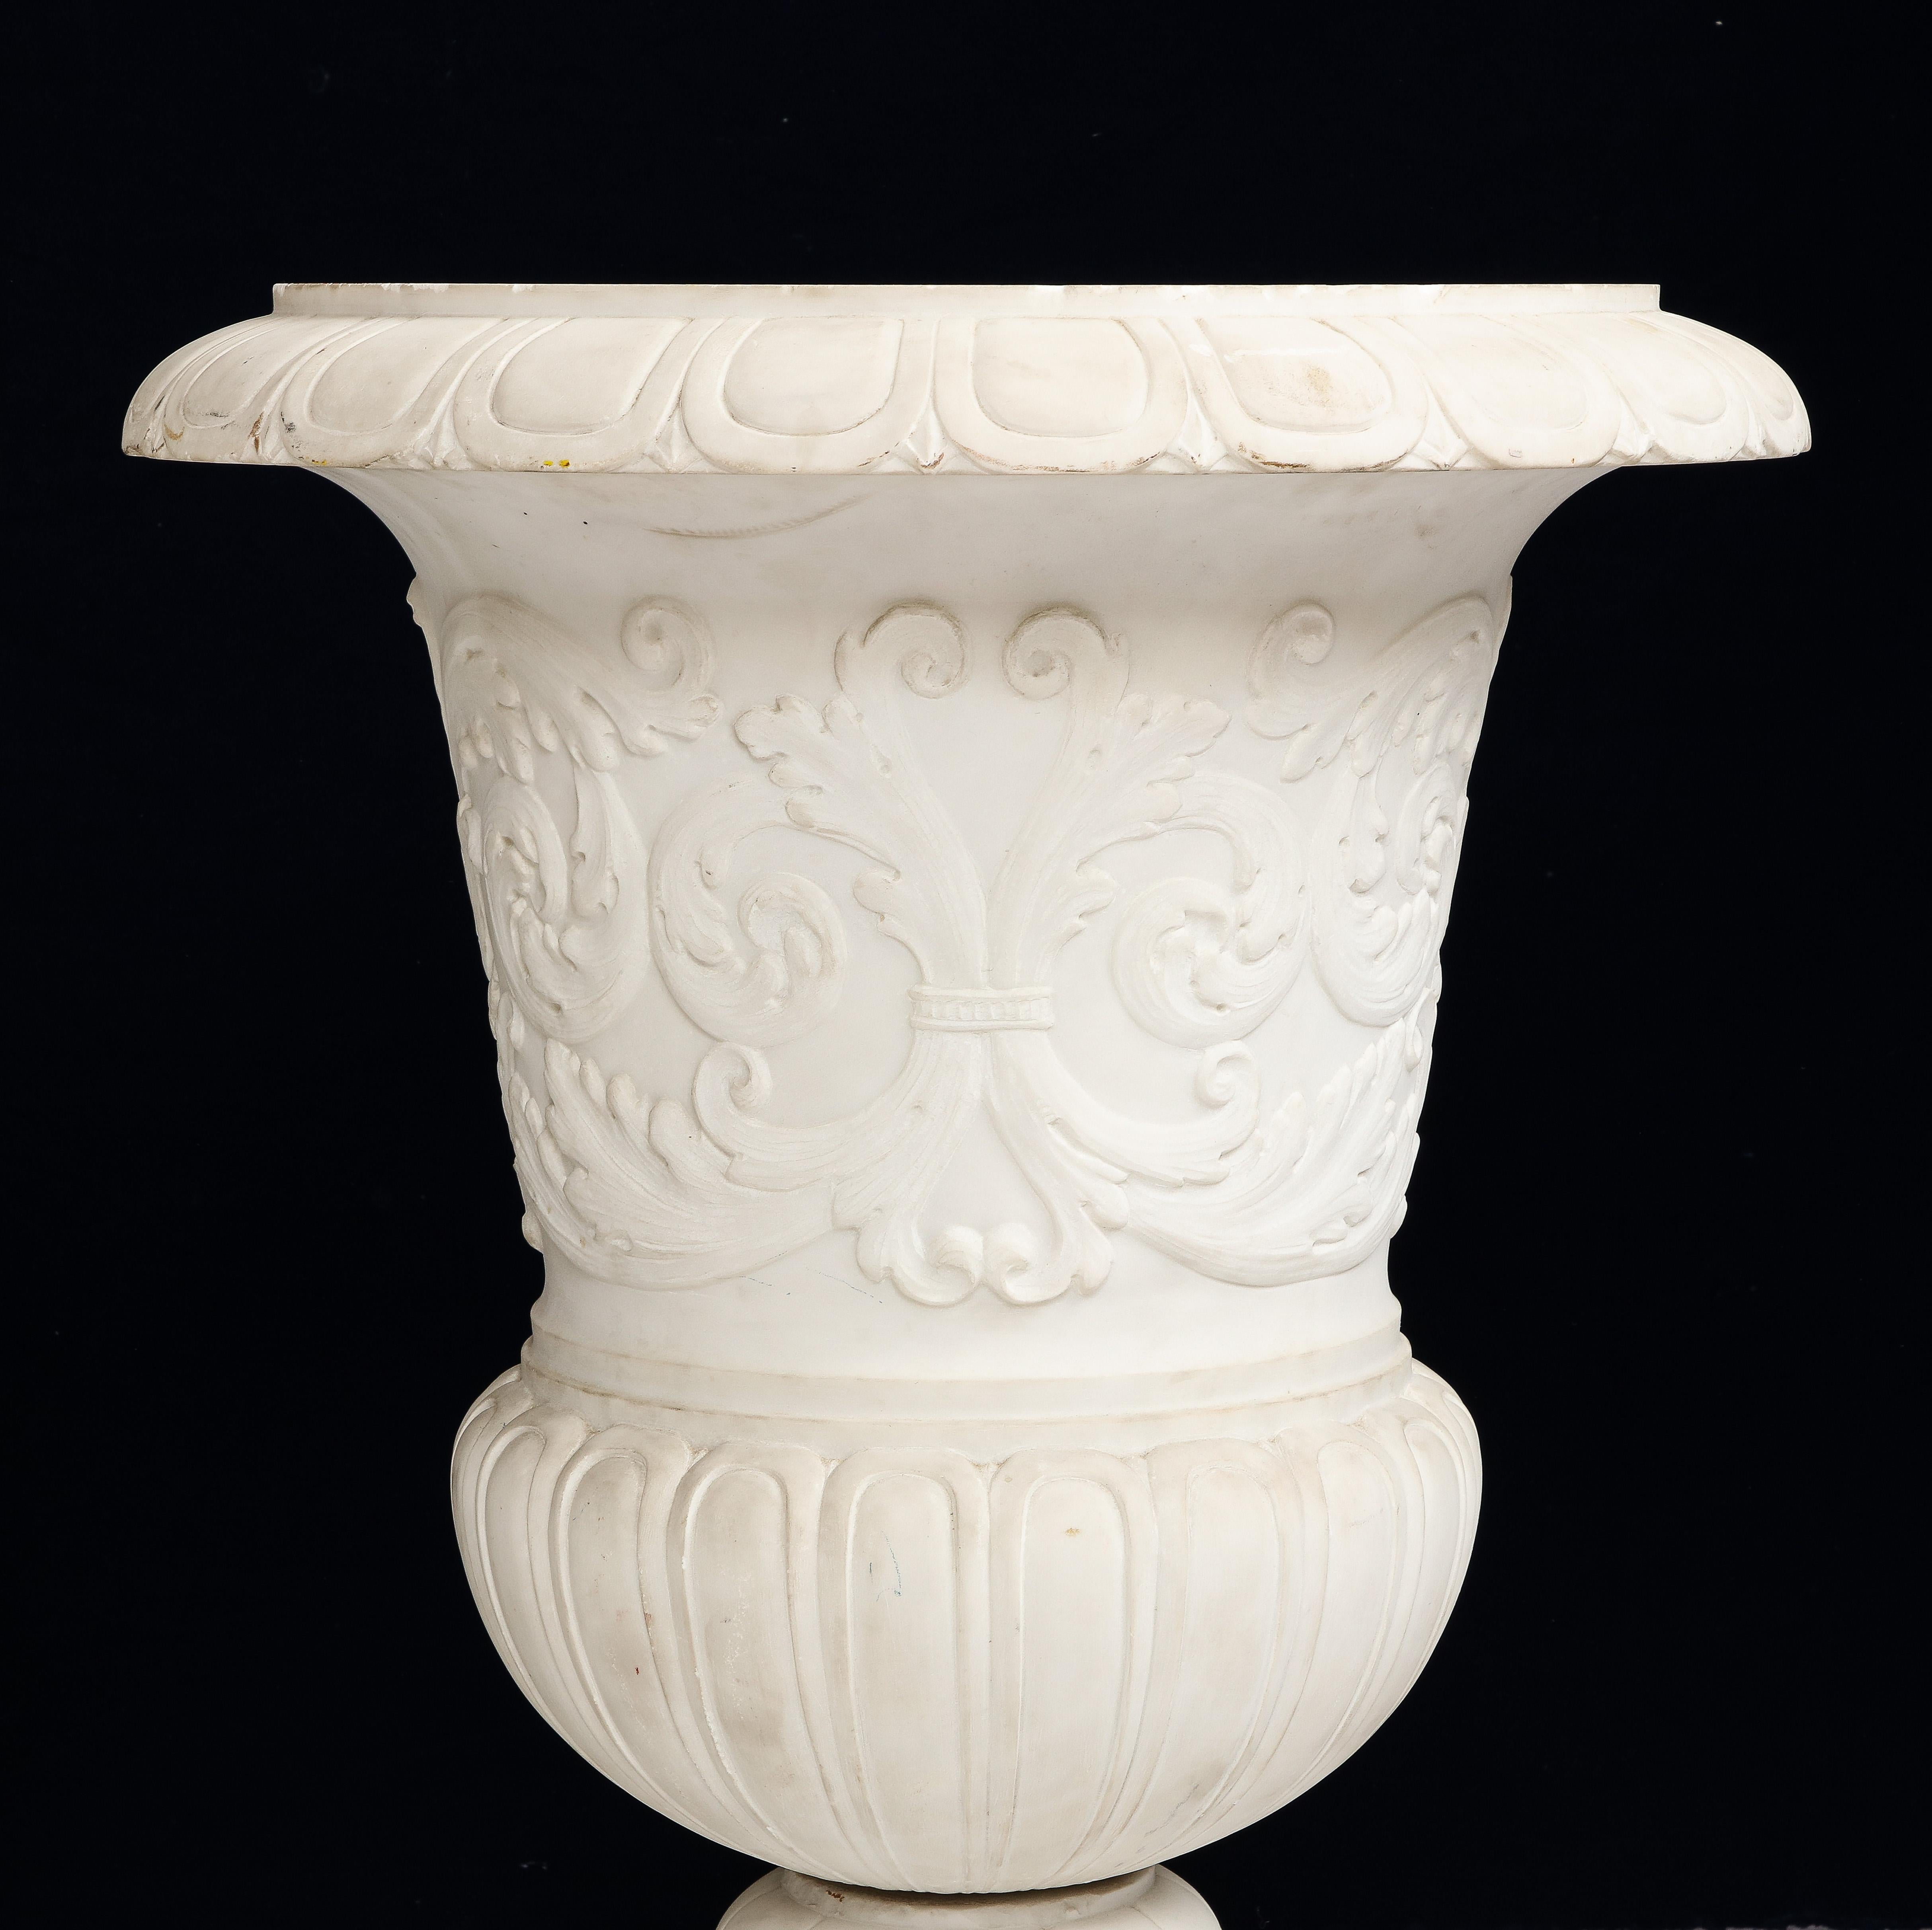 Pair of Italian Carrara Marble Medici Vases w/ Neoclassical Motifs in Relief For Sale 6